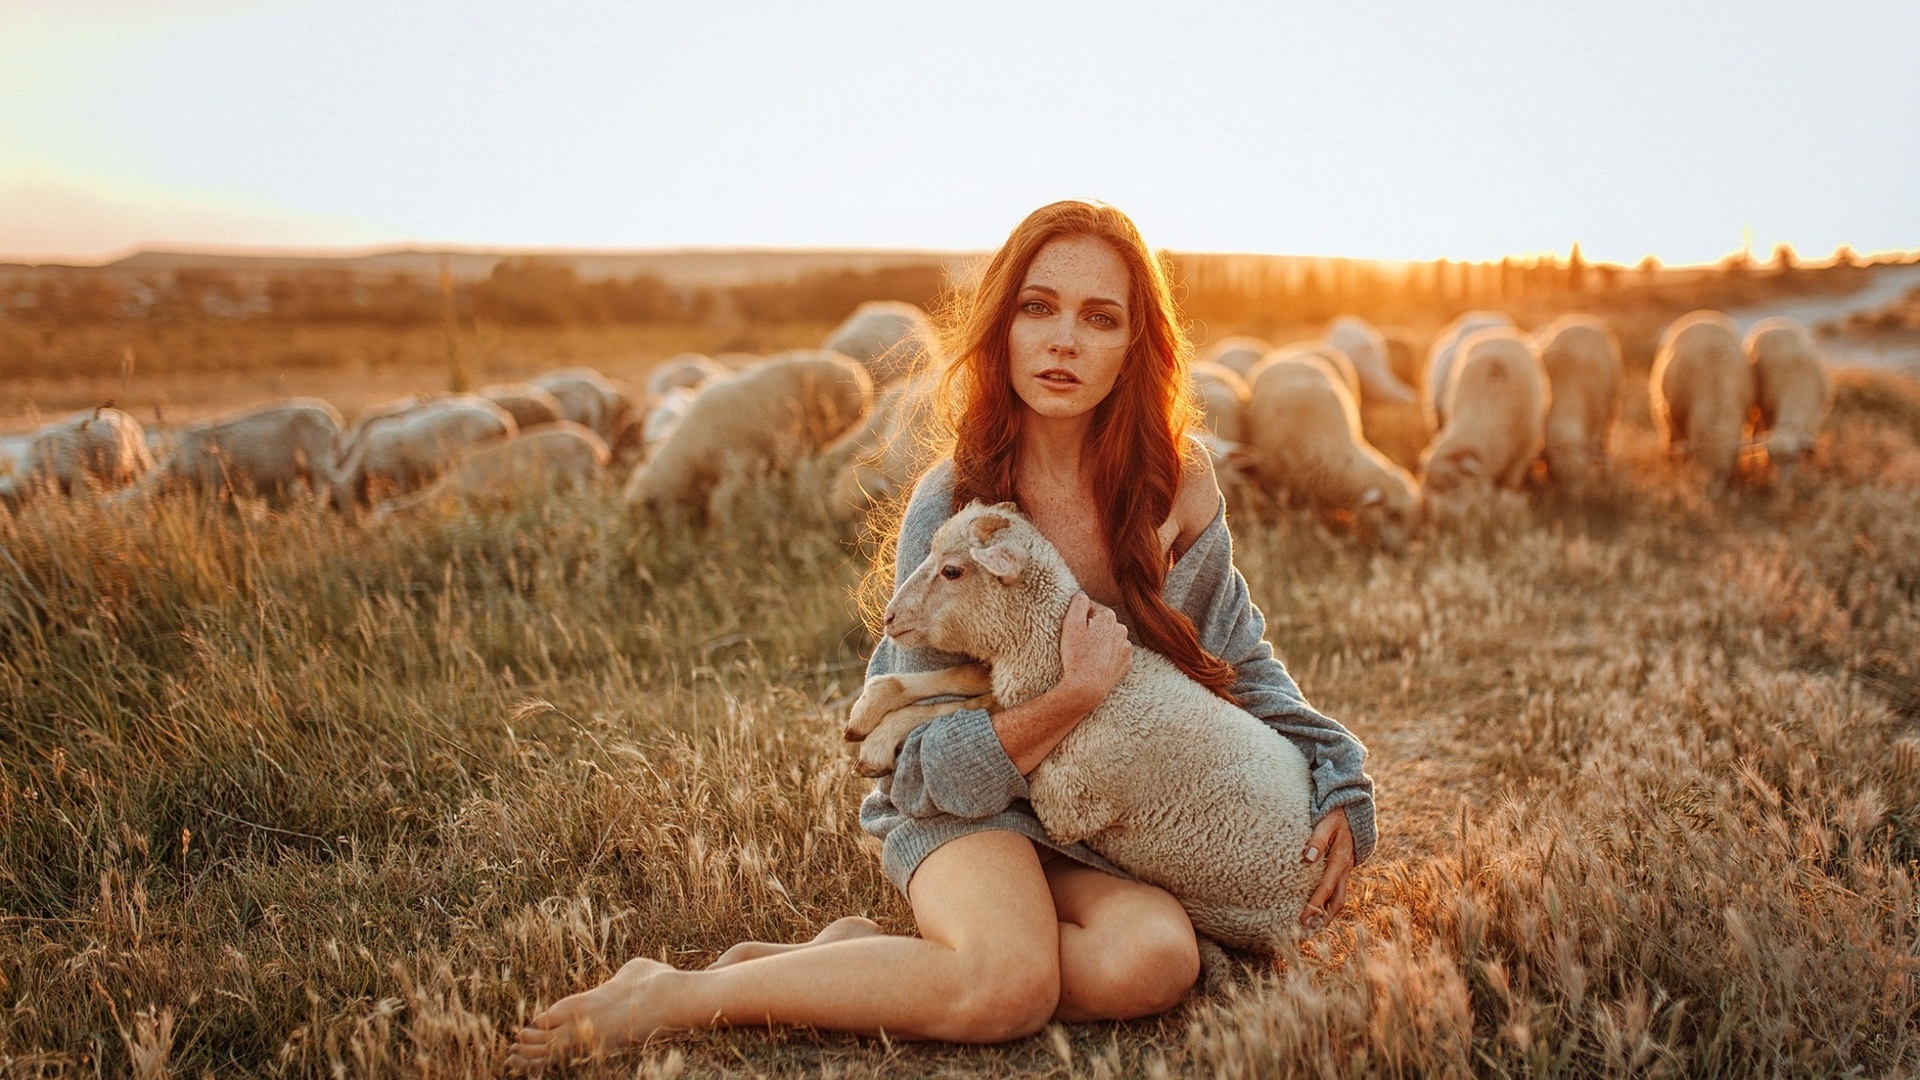 Girl with Sheep wallpaper 1920x1080